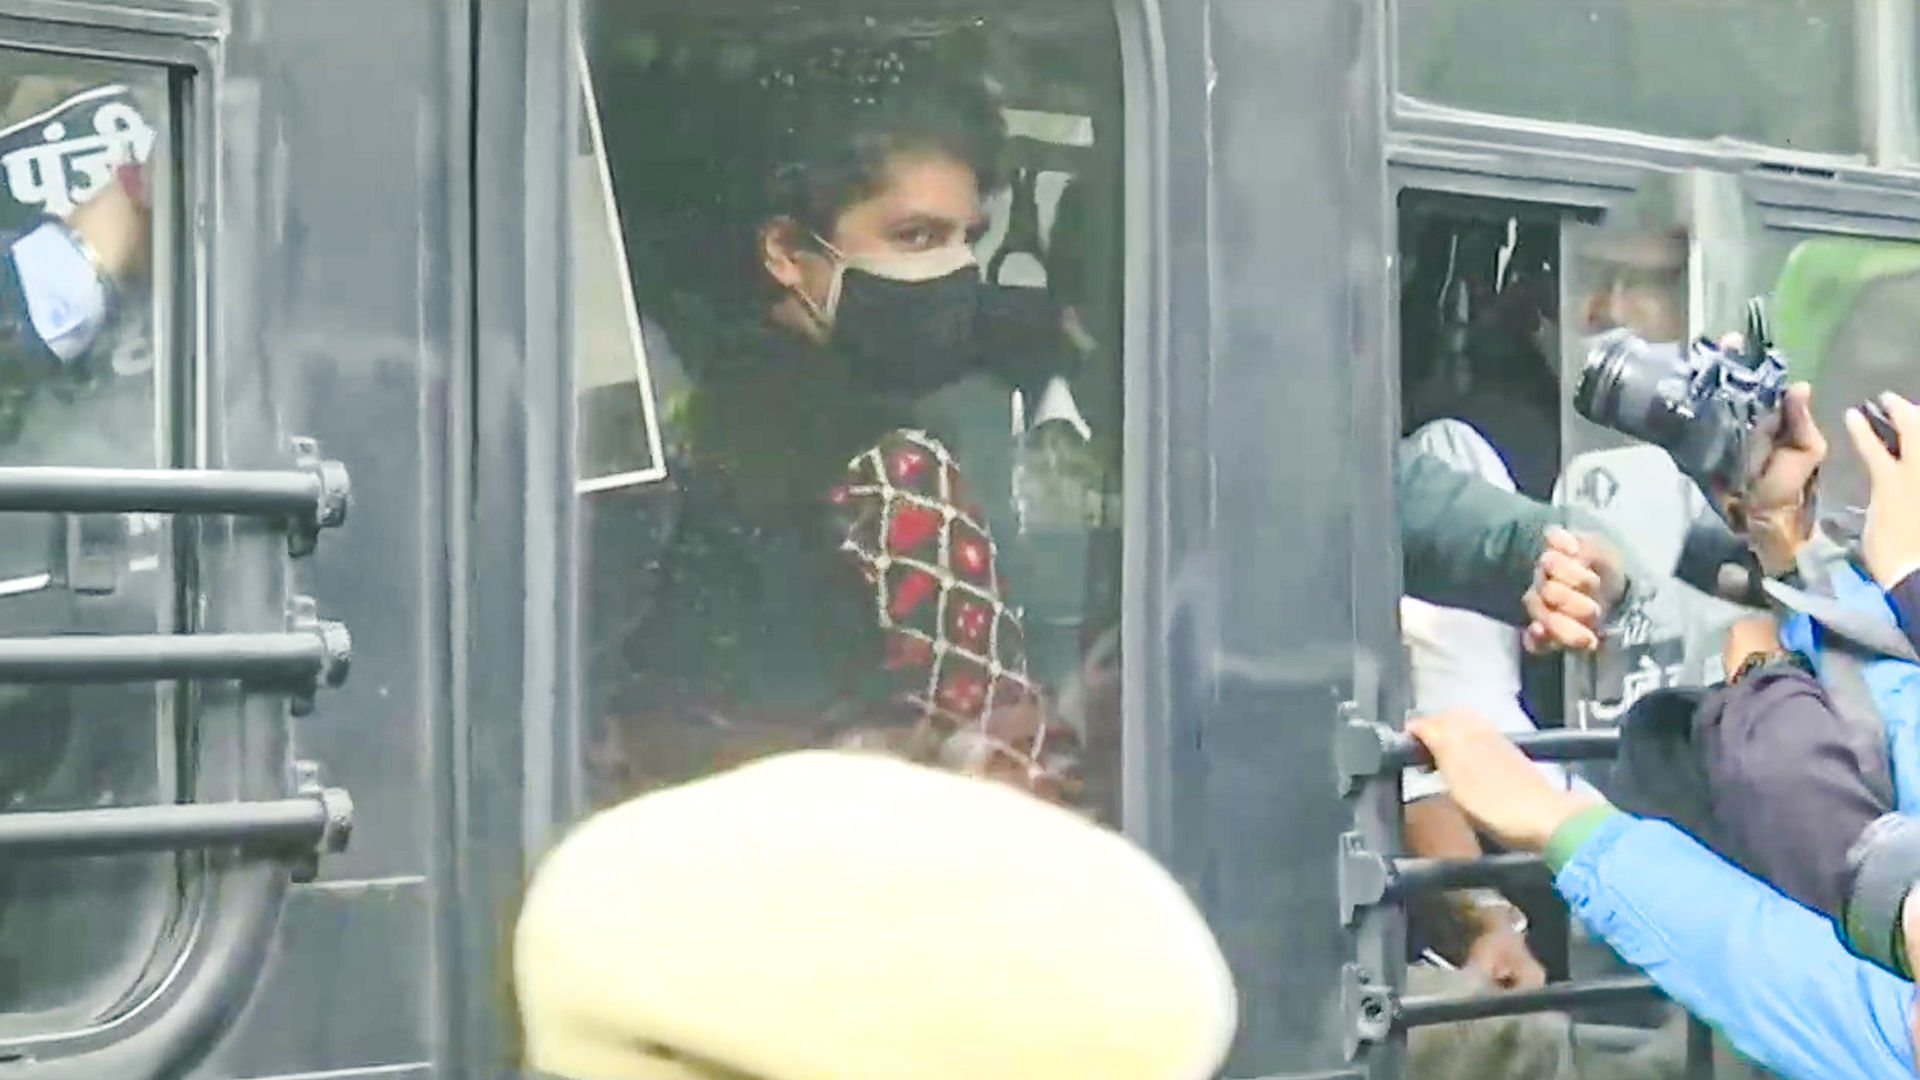 Priyanka Gandhi, other Congress leaders detained while on way to Rashtrapati Bhavan to protest farm laws